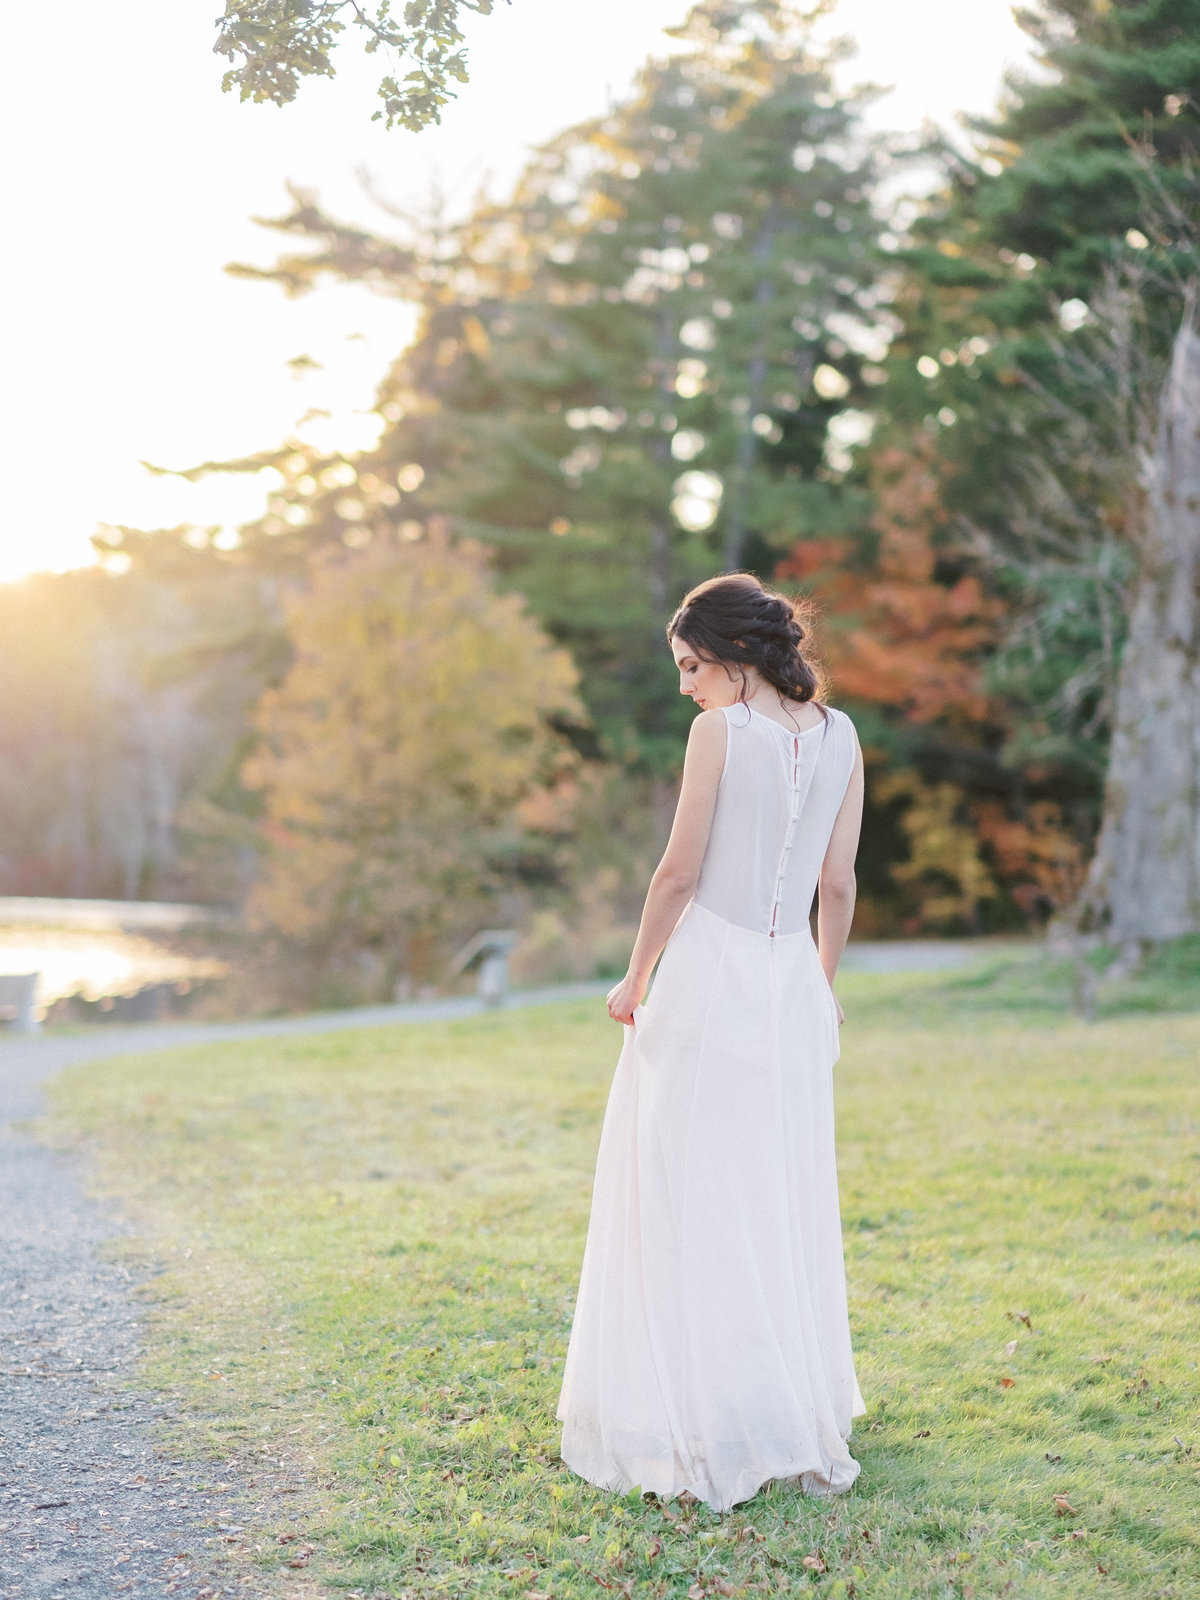 Jacqueline Anne Photography - Mount Uniacke Editorial-44